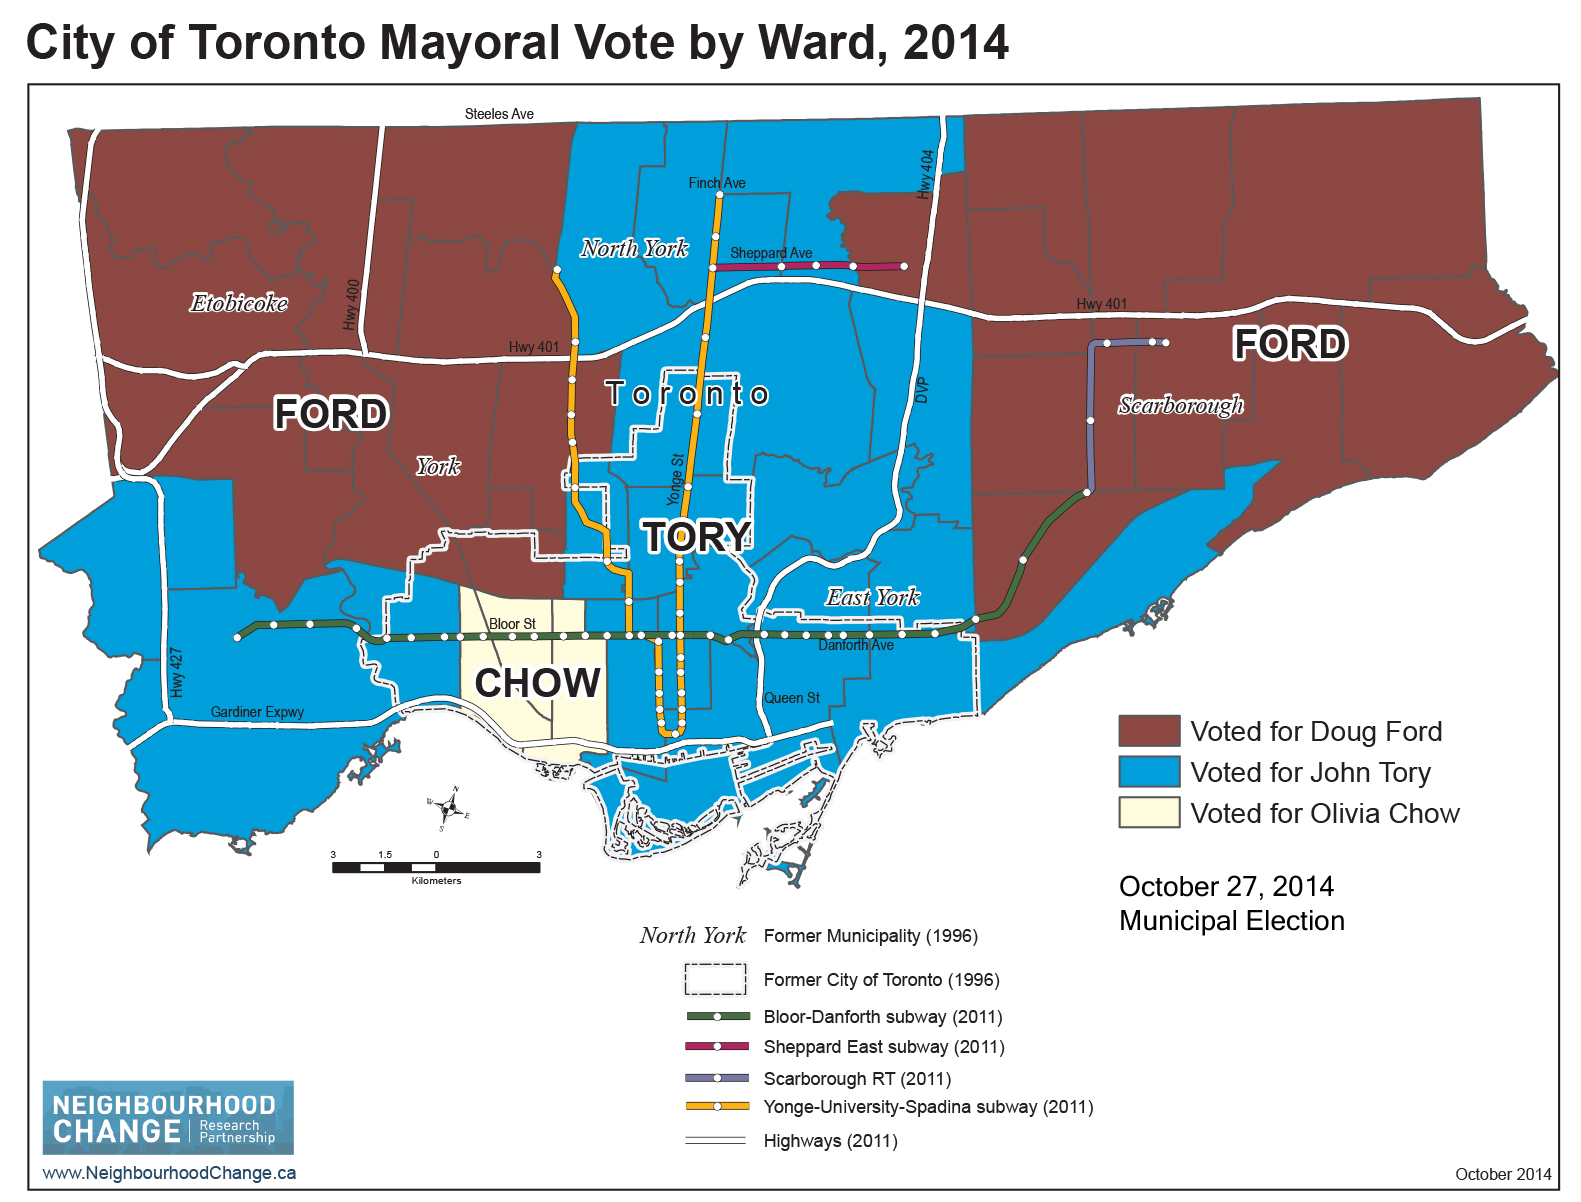 2014-Mayoral-Vote-and-INCOME-and-THREE-CITIES-Table-and-NCRP-4-maps-4.jpg